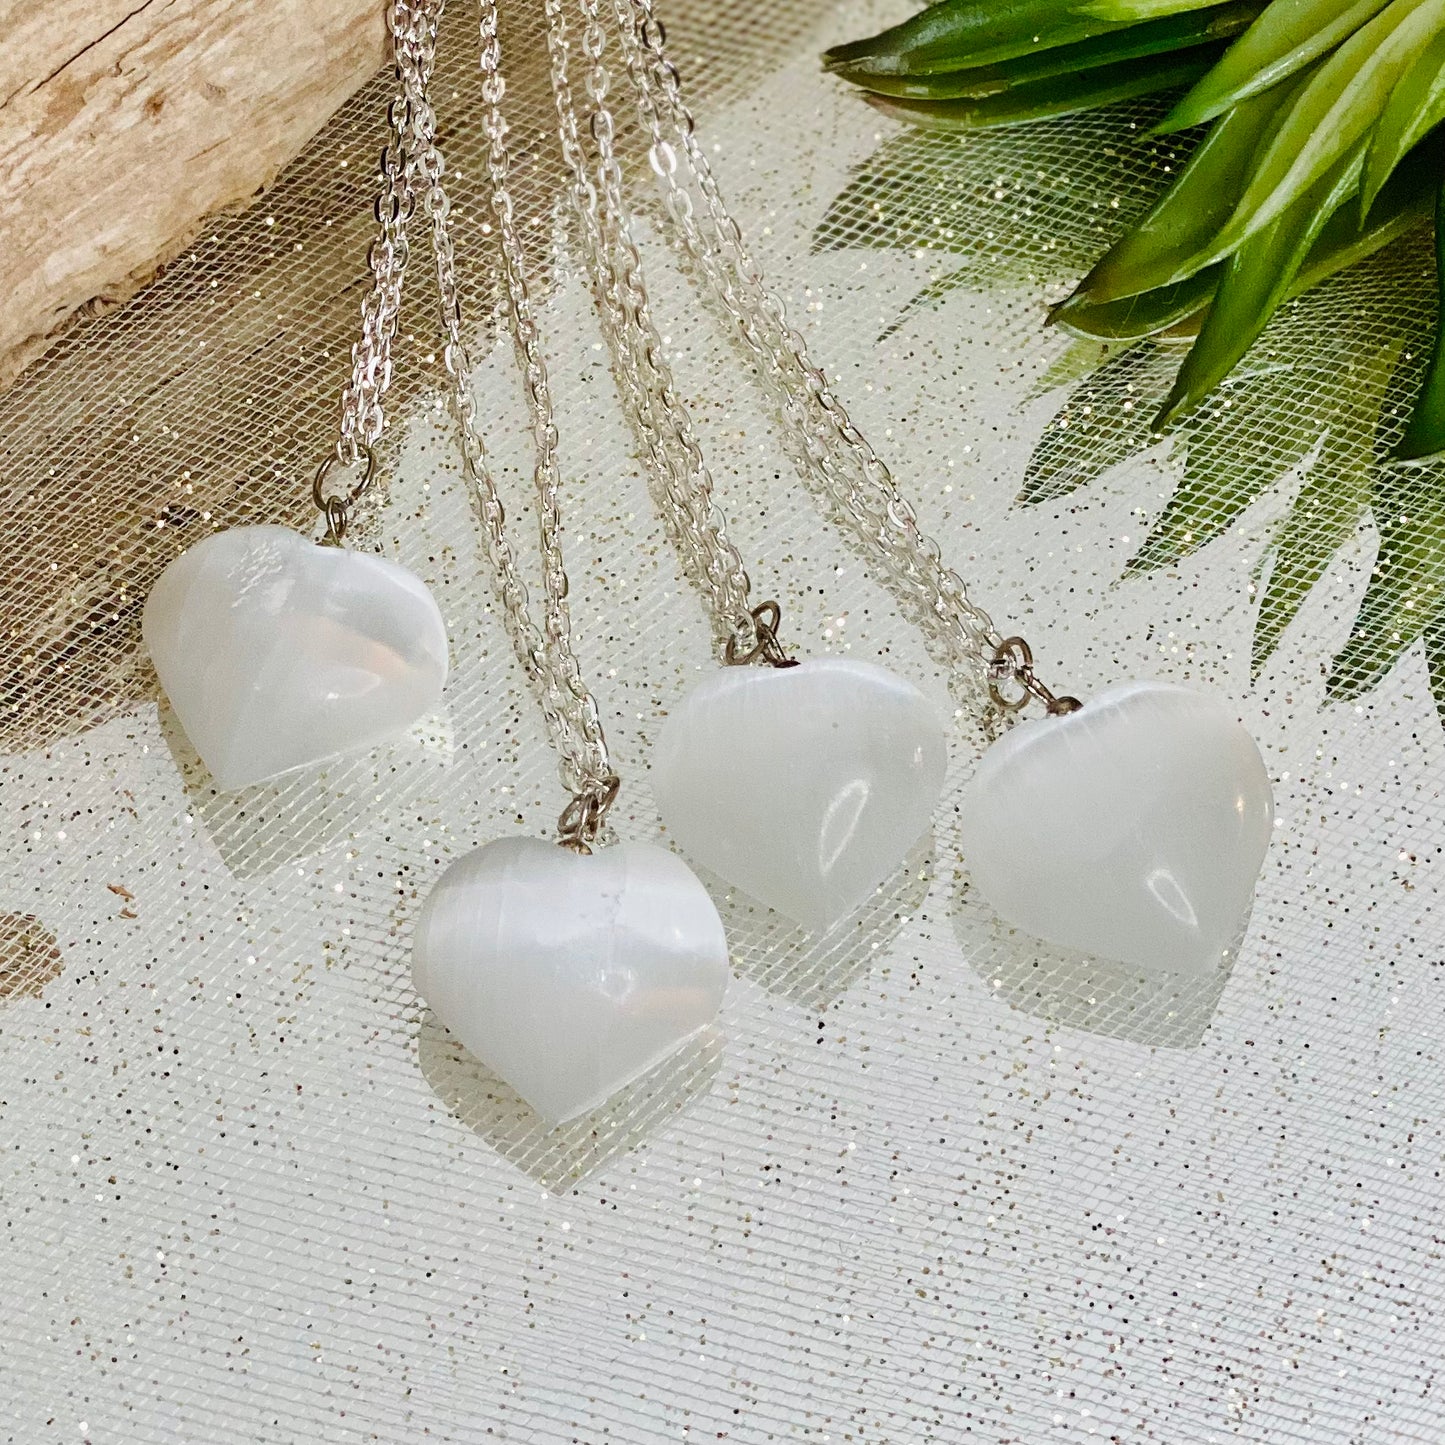 Selenite Crystal Heart Necklace with 18” Chain for Serenity and Peace